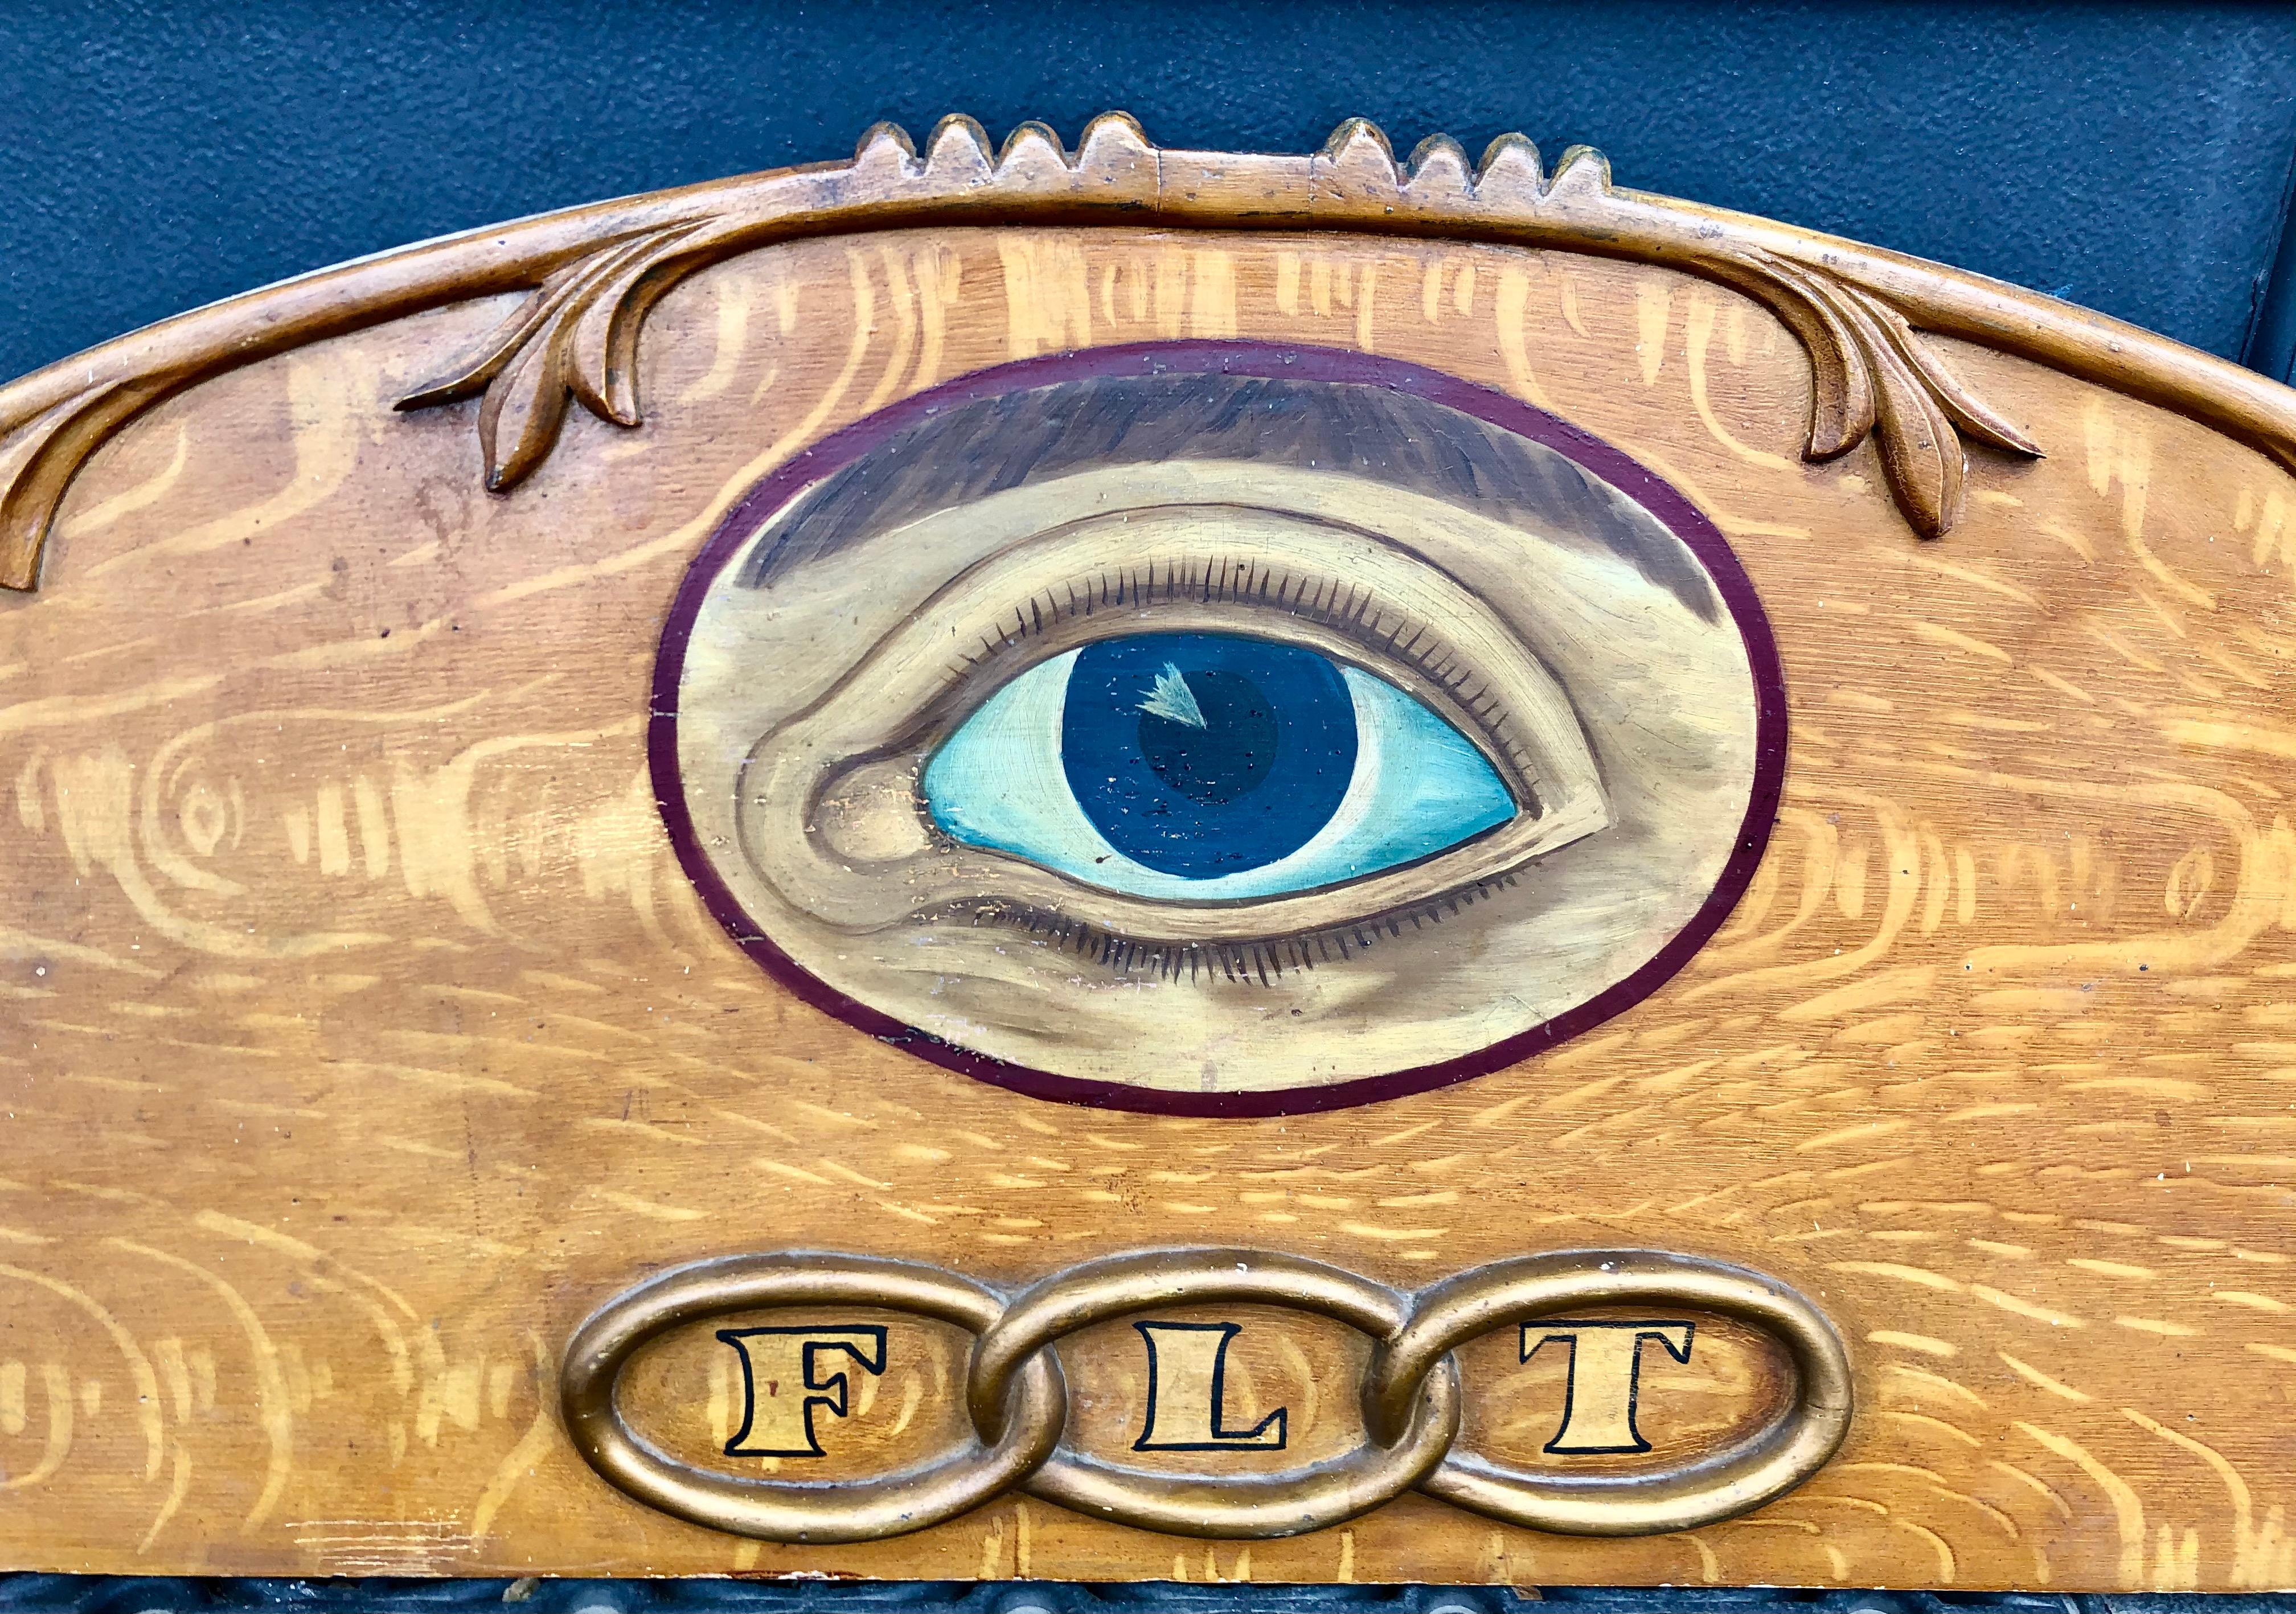 Wood with original paint featuring the all seeing eye and F L T friendship, love, truth in the chain. Dates to the late 19th century and is a fantastic size at 19